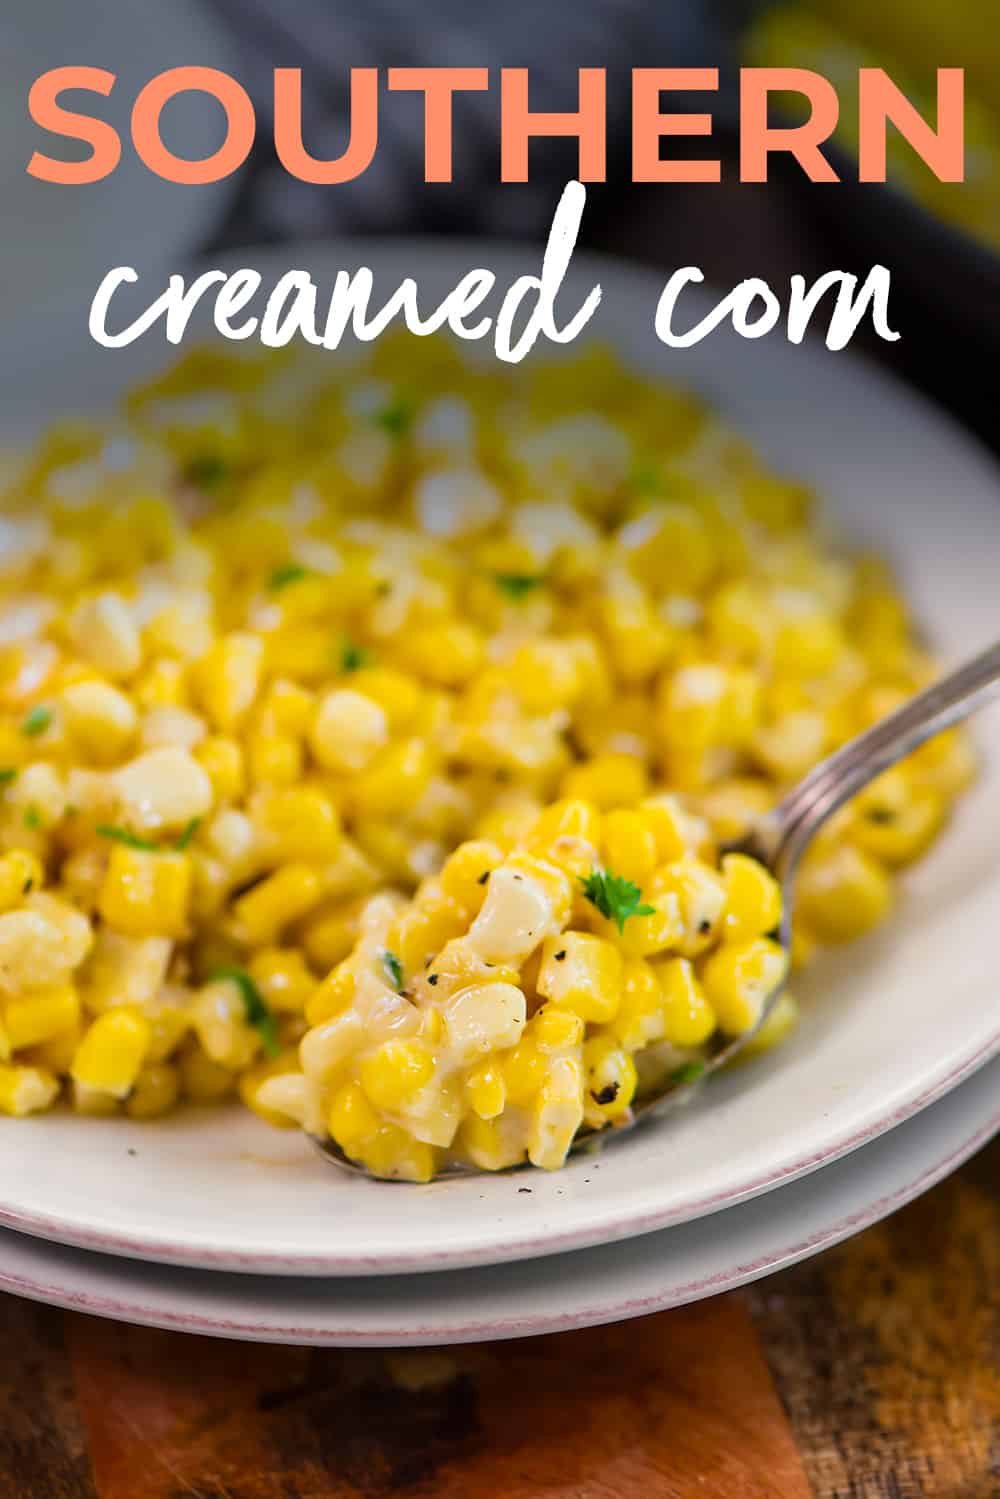 Spoonful of creamed corn recipe on plate.